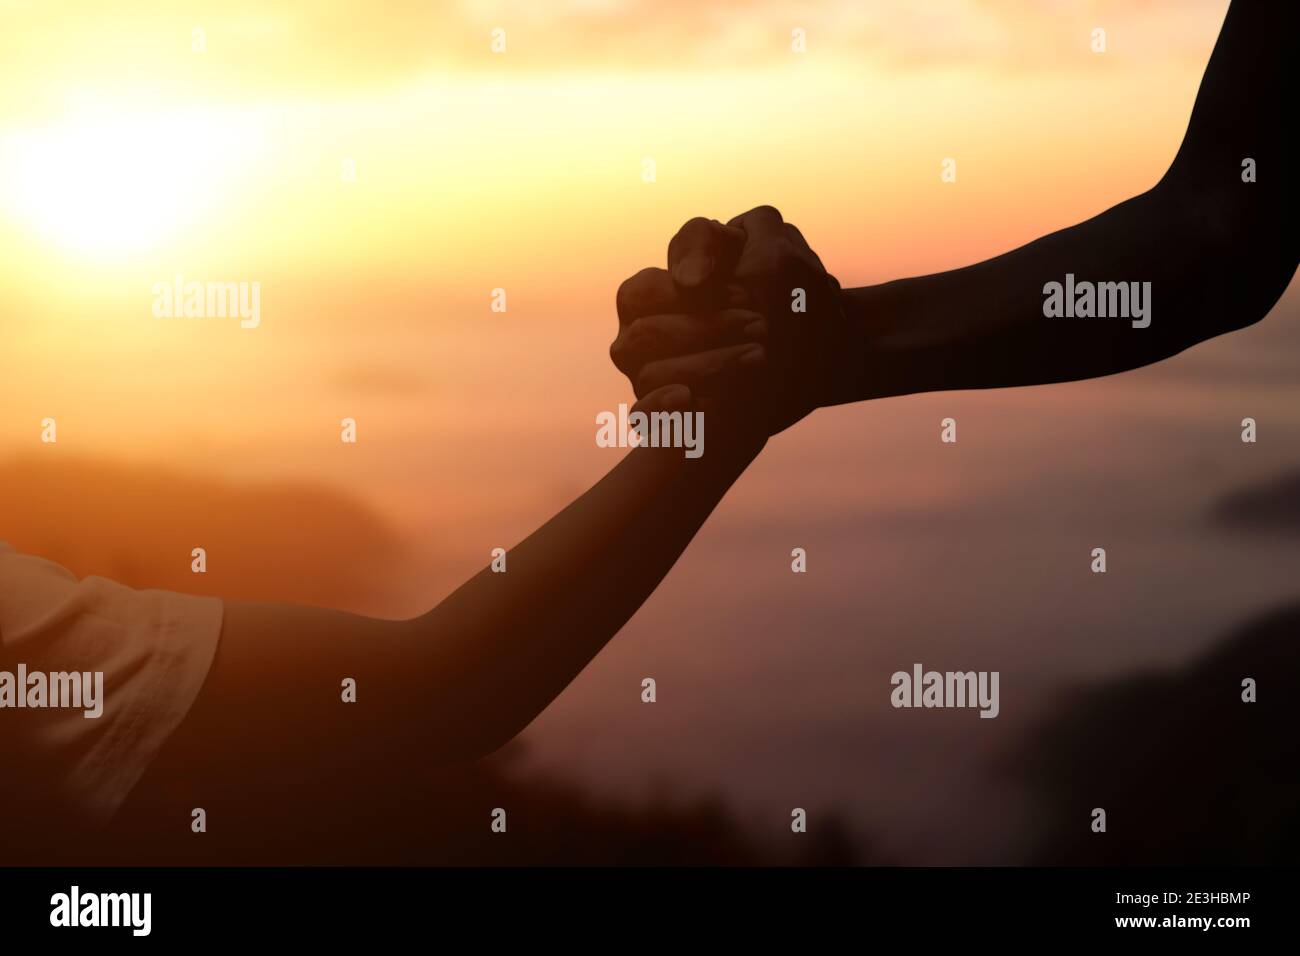 Silhouette of giving a helping hand, hope and support each other over sunset background. Stock Photo